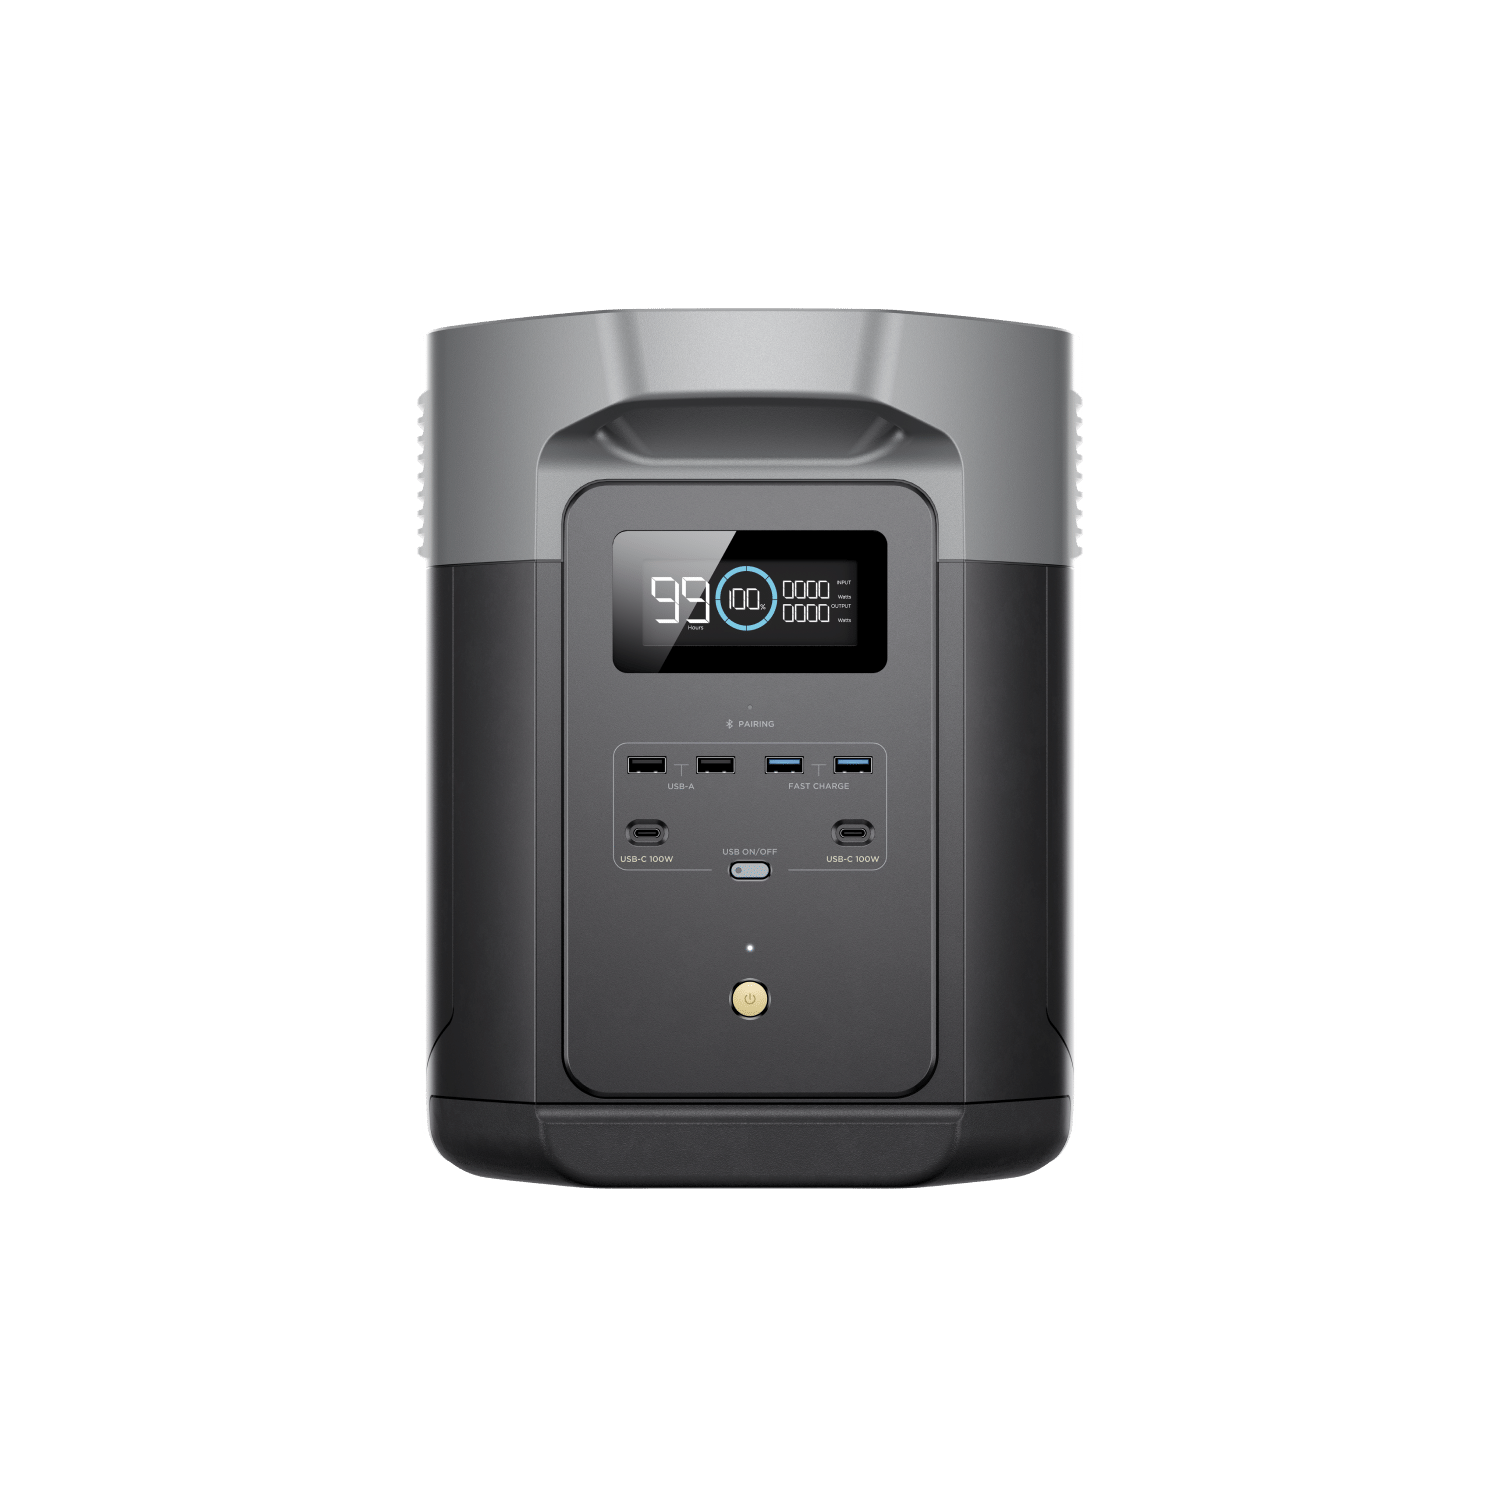 Save $350 Off the Ecoflow Delta 2 1024Wh LiFePO4 Power Station - IGN